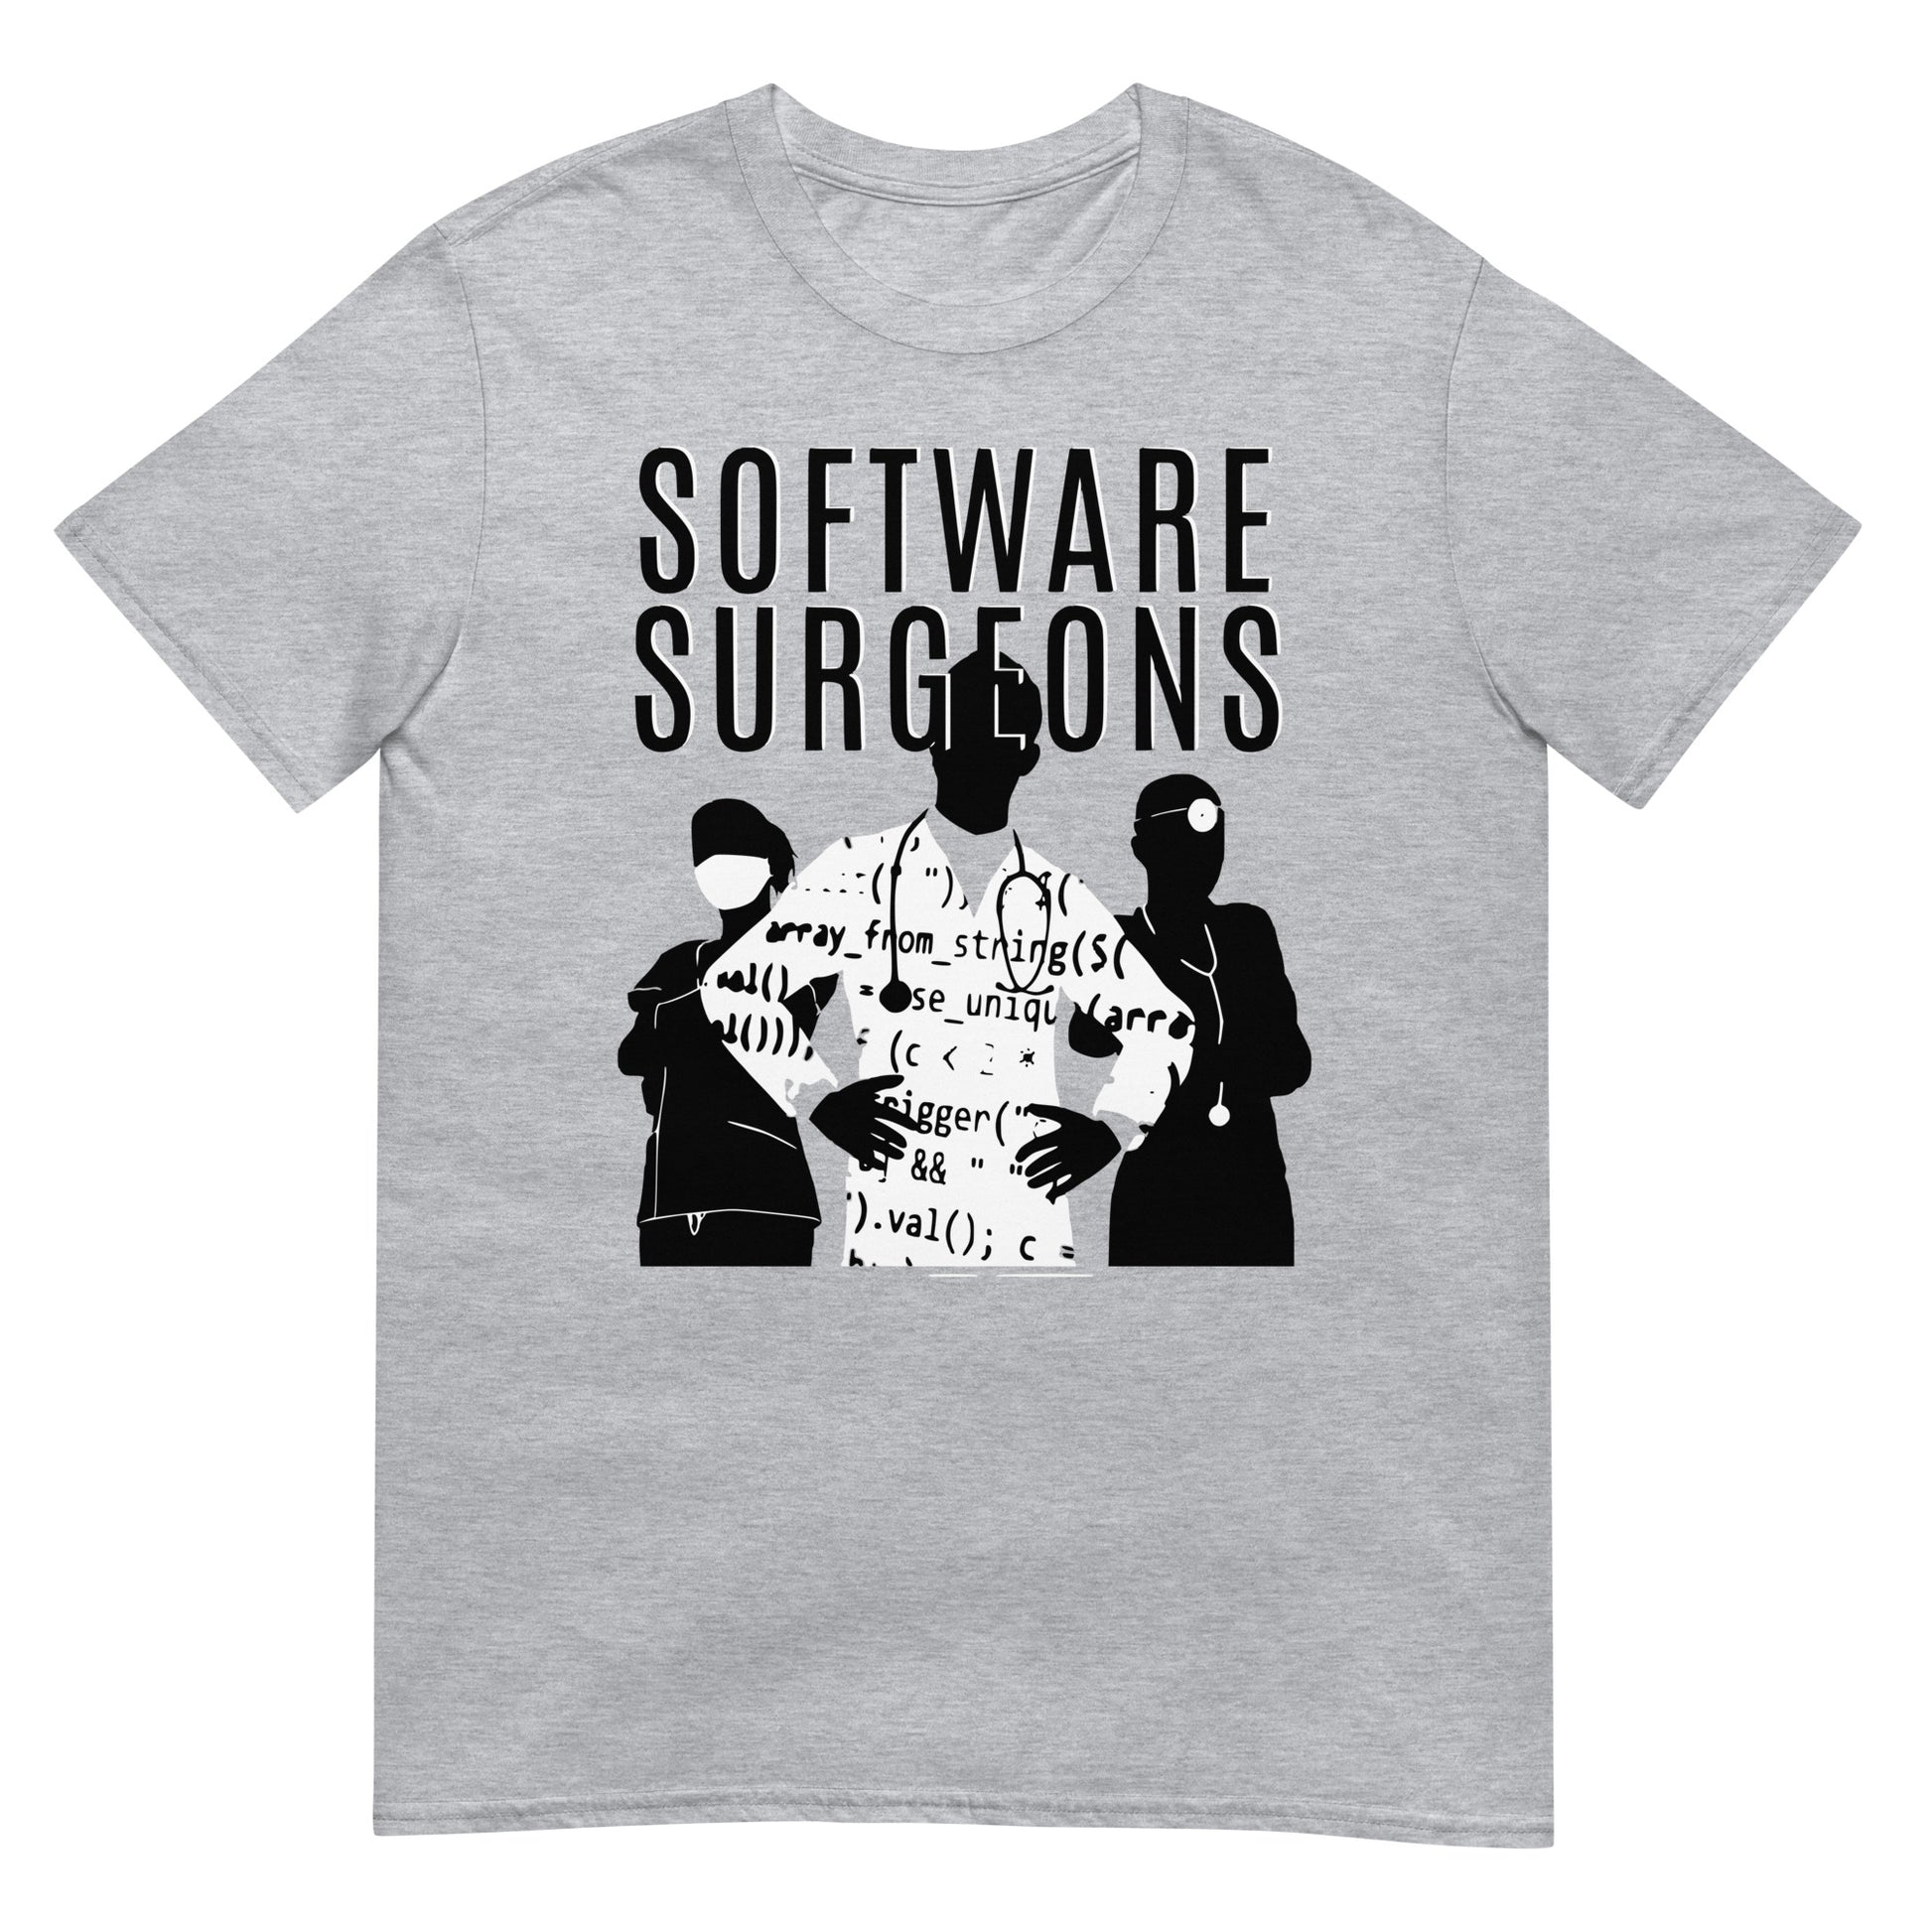 surgeon-themed tshirt featuring code and programmer